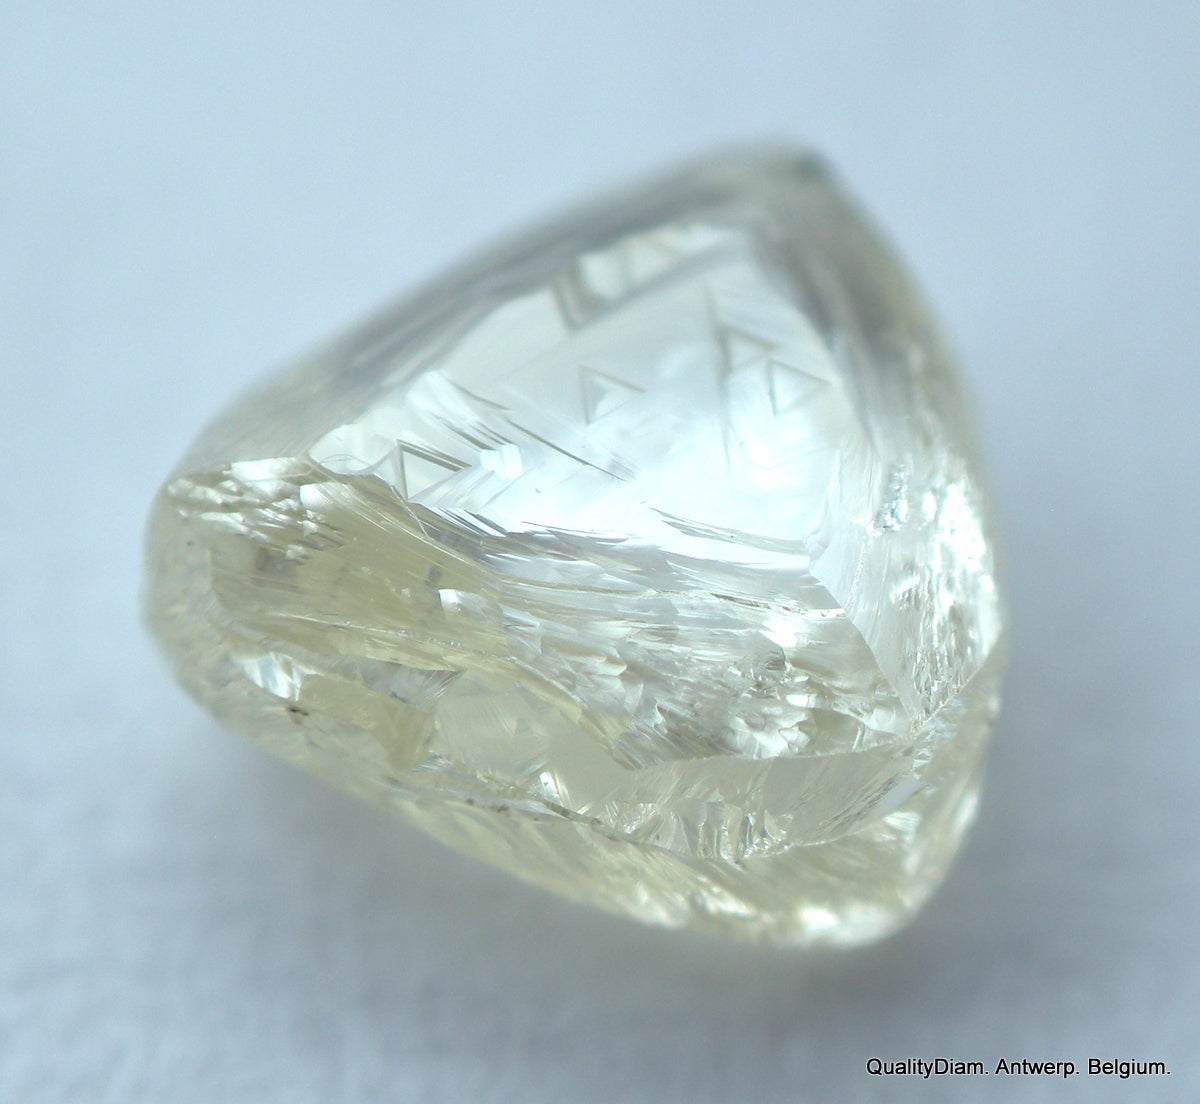 The Wonder of Mother Nature - Largest Rough Diamond - Gem Voyager